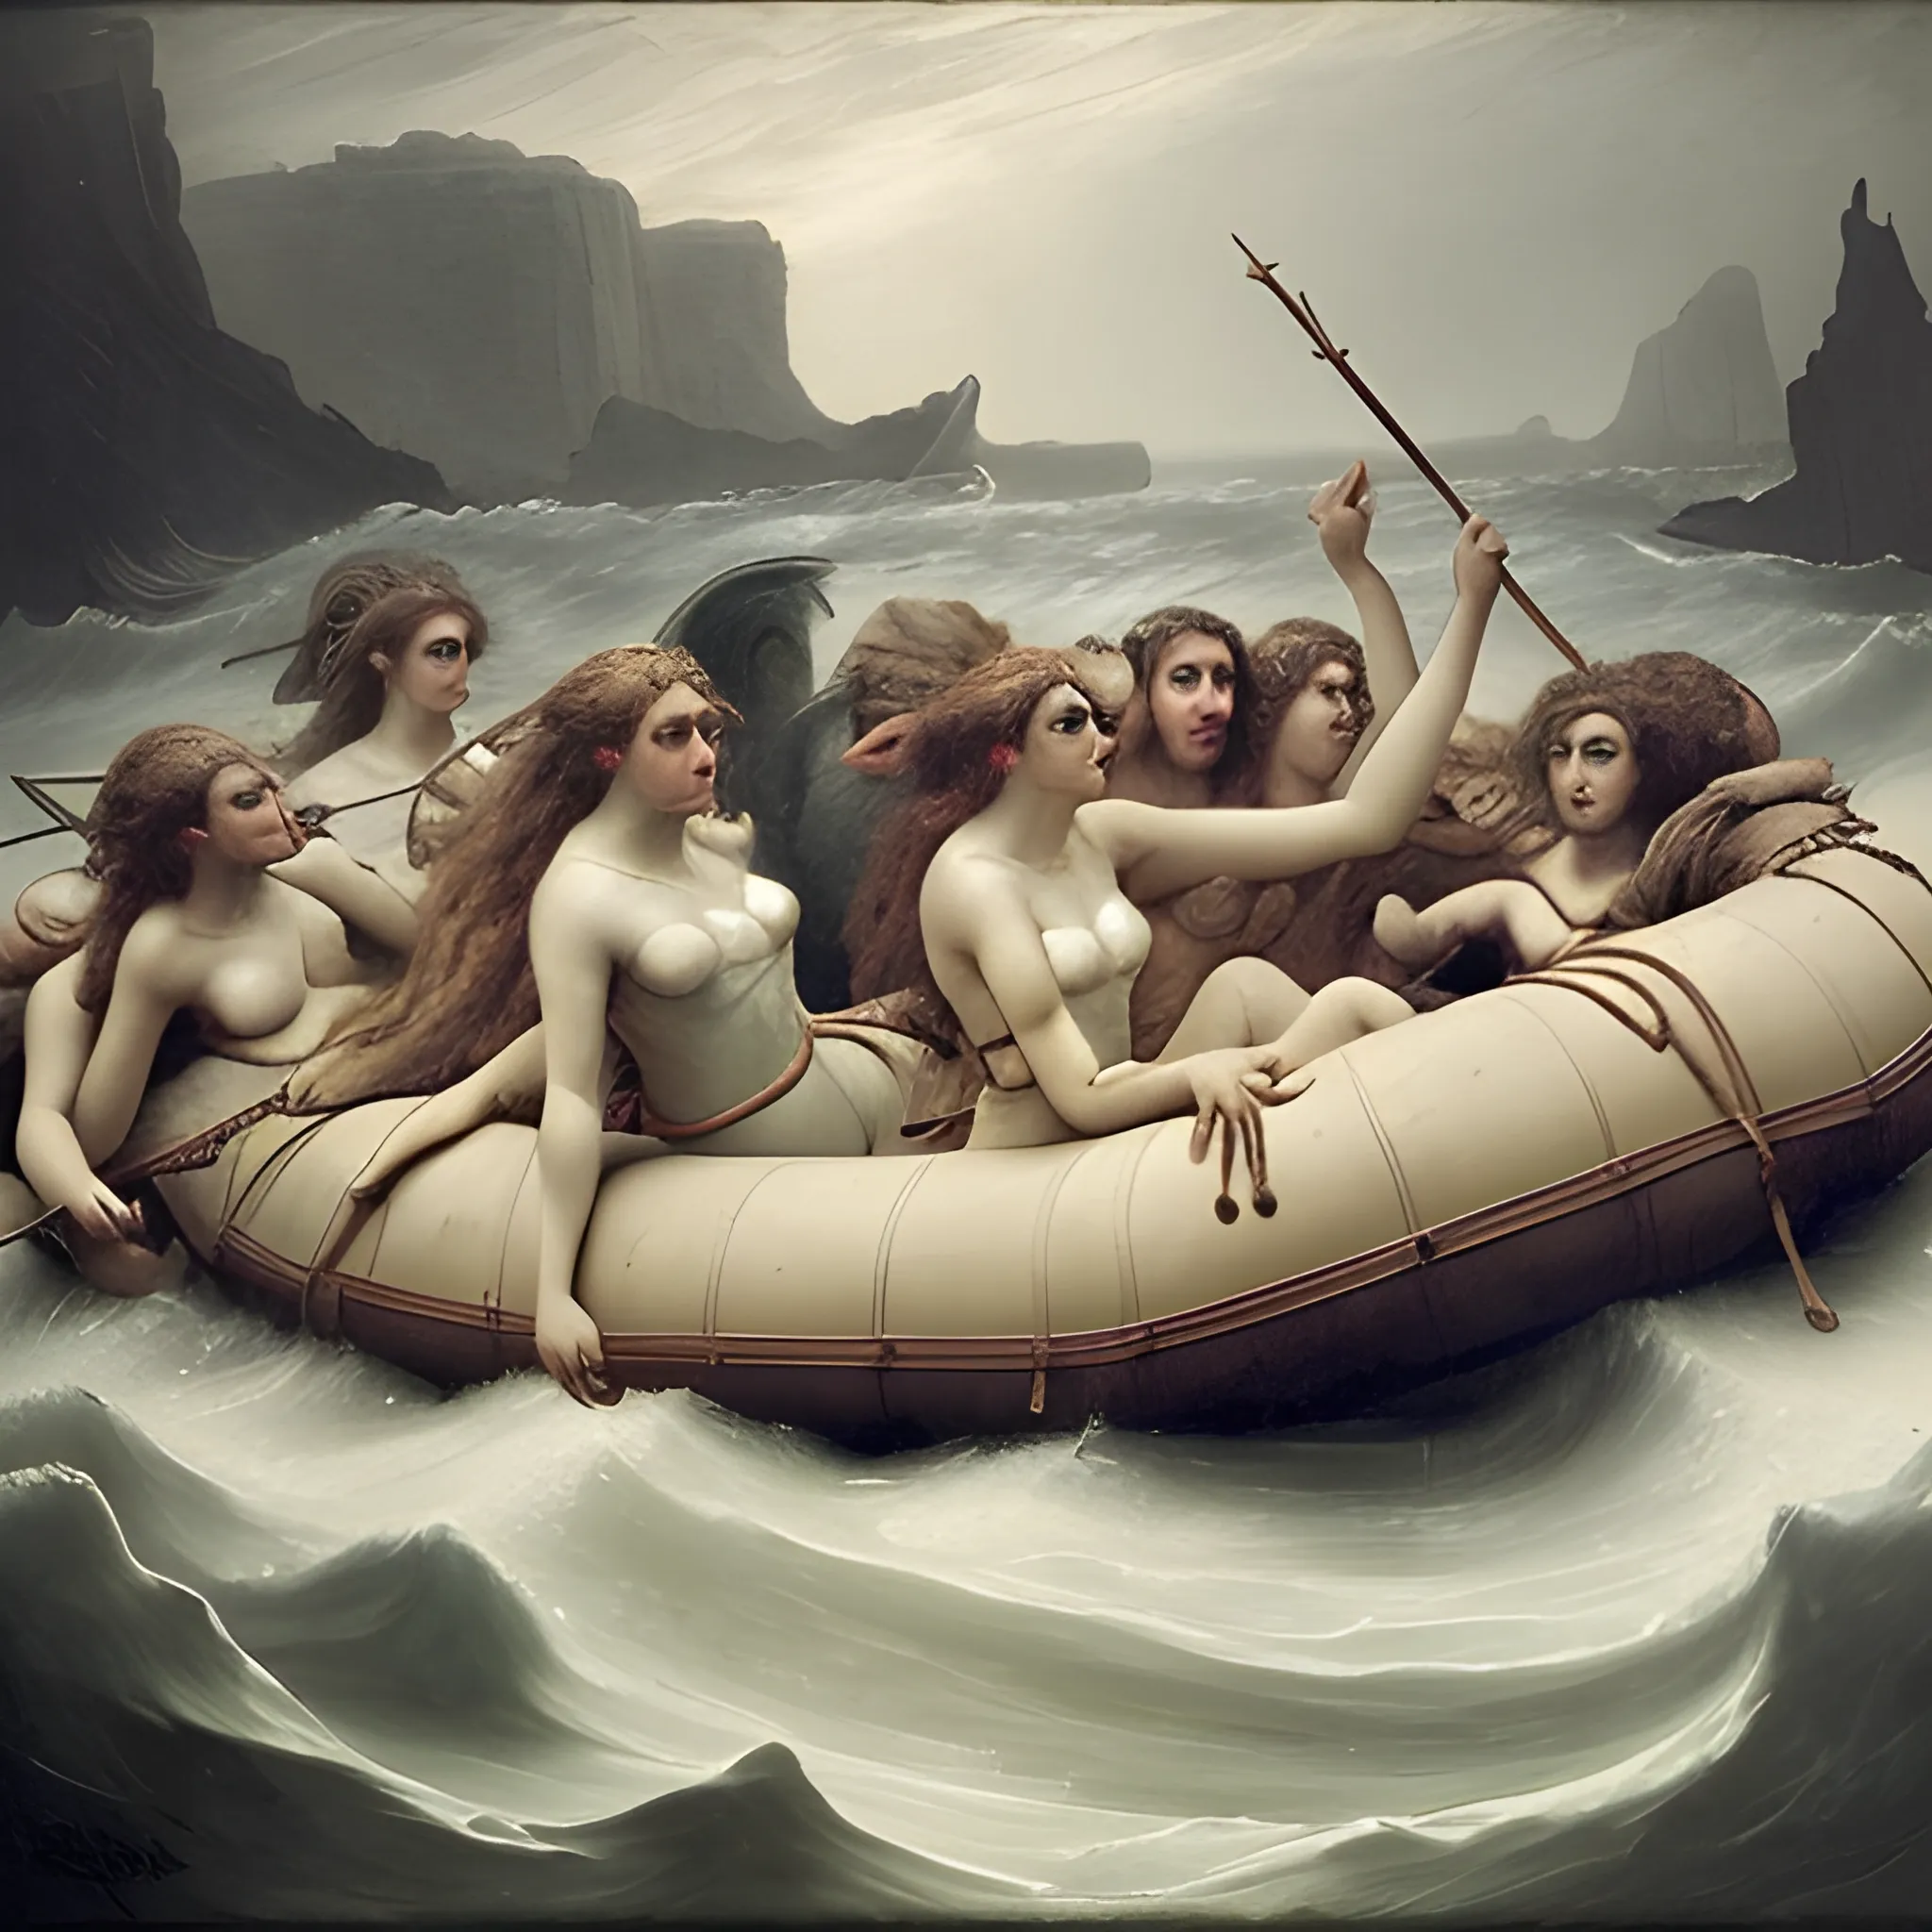 create a reproduction of a female portrait "The Raft of the Medusa" by Théodore Géricault. Whimsical elements, eerie atmosphere, chaotic background. Photorealism, Color Photography, Mid-20th Century-Present.